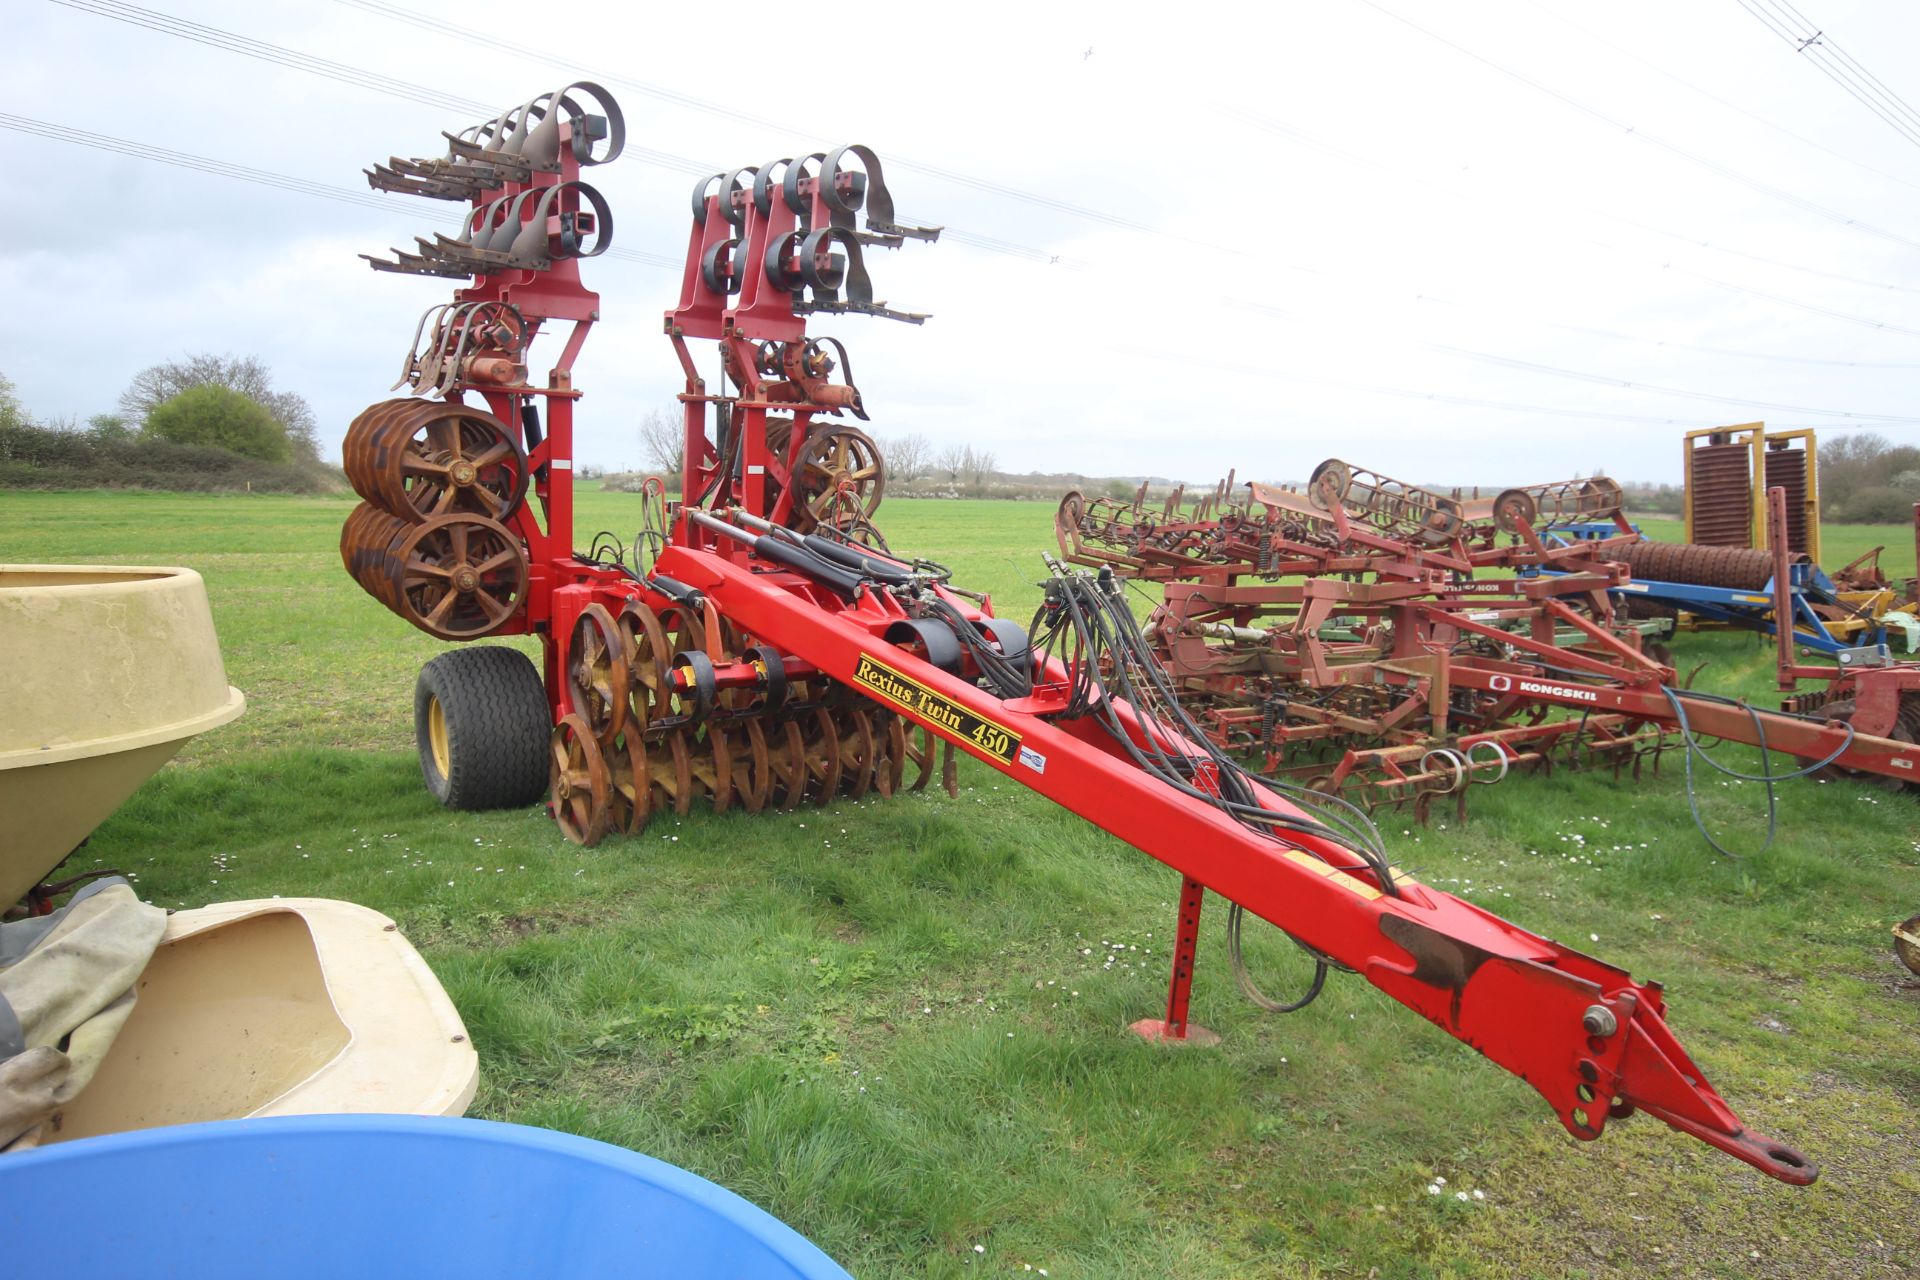 Vaderstad 4.5m Rexius Twin 450. With sprung legs, levelling paddles and double cast iron rings.